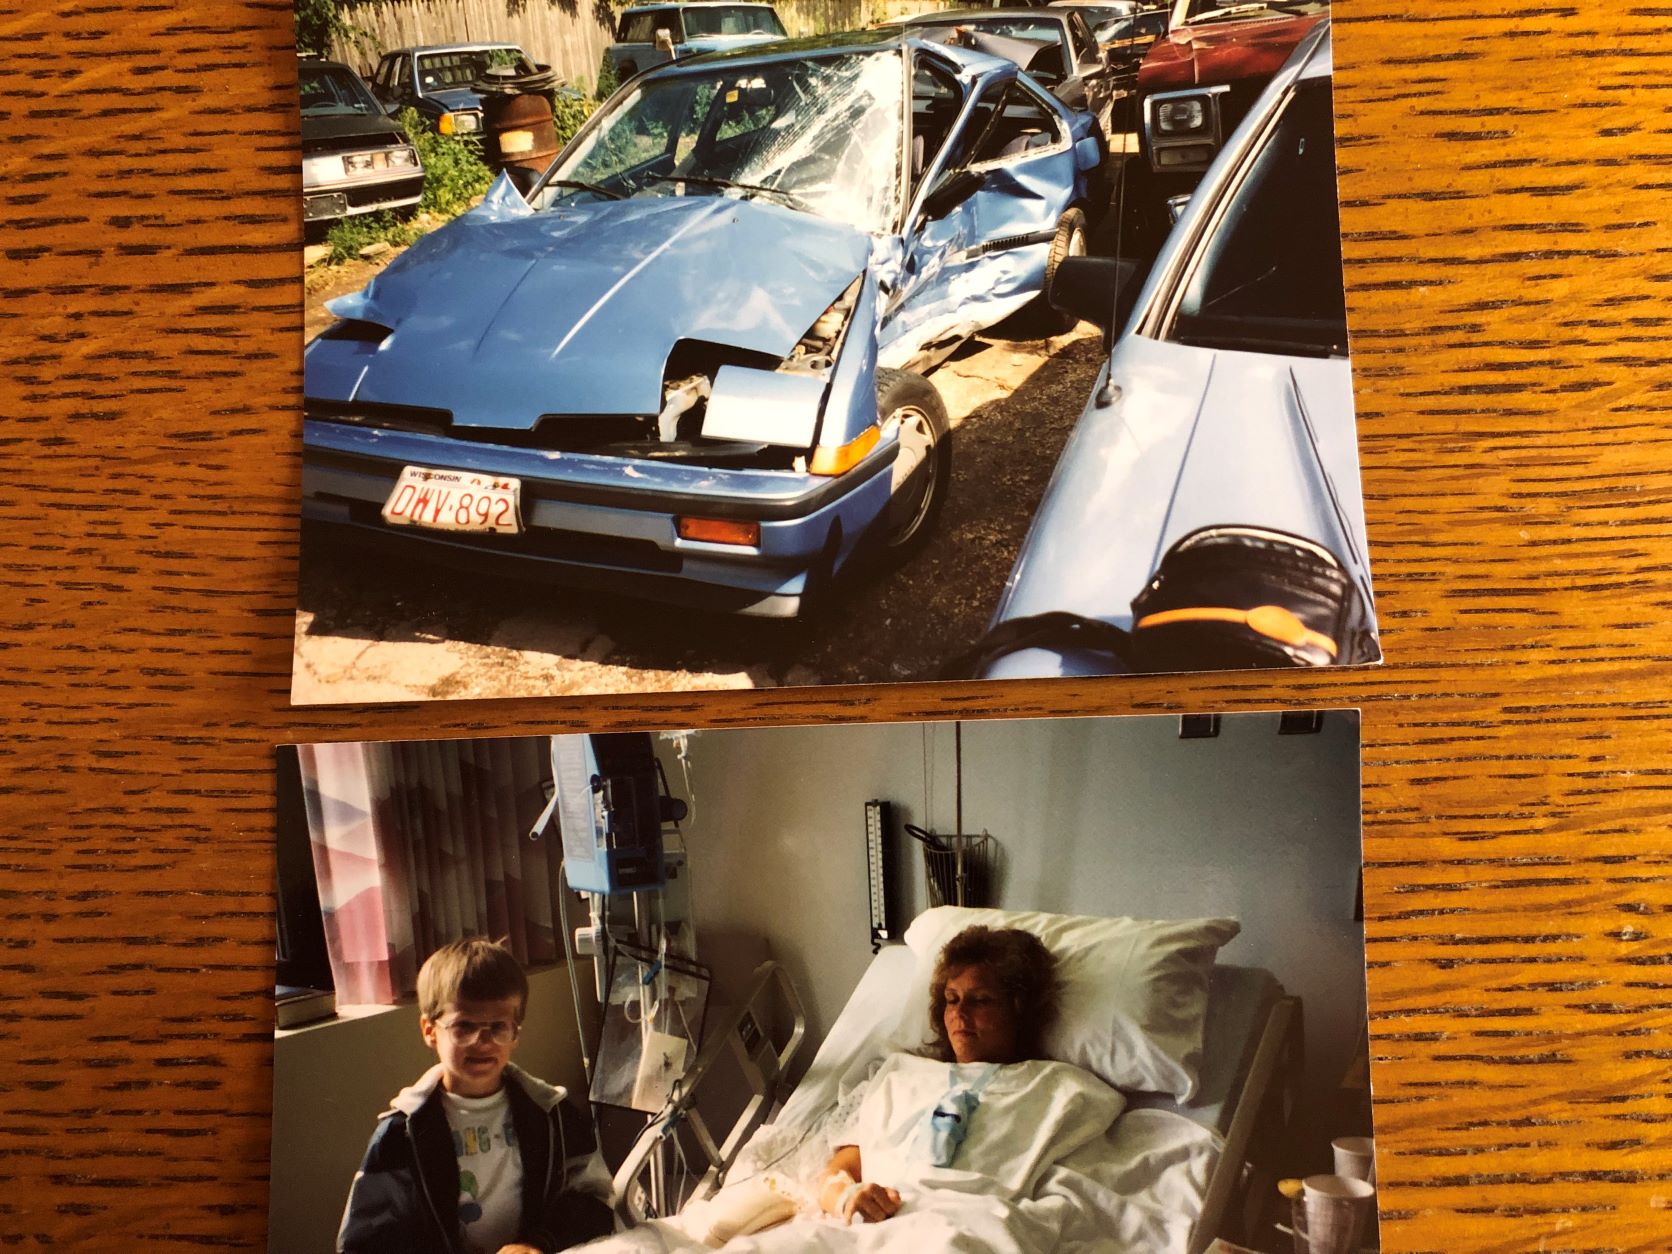 Karen's Car Accident and in Hospital